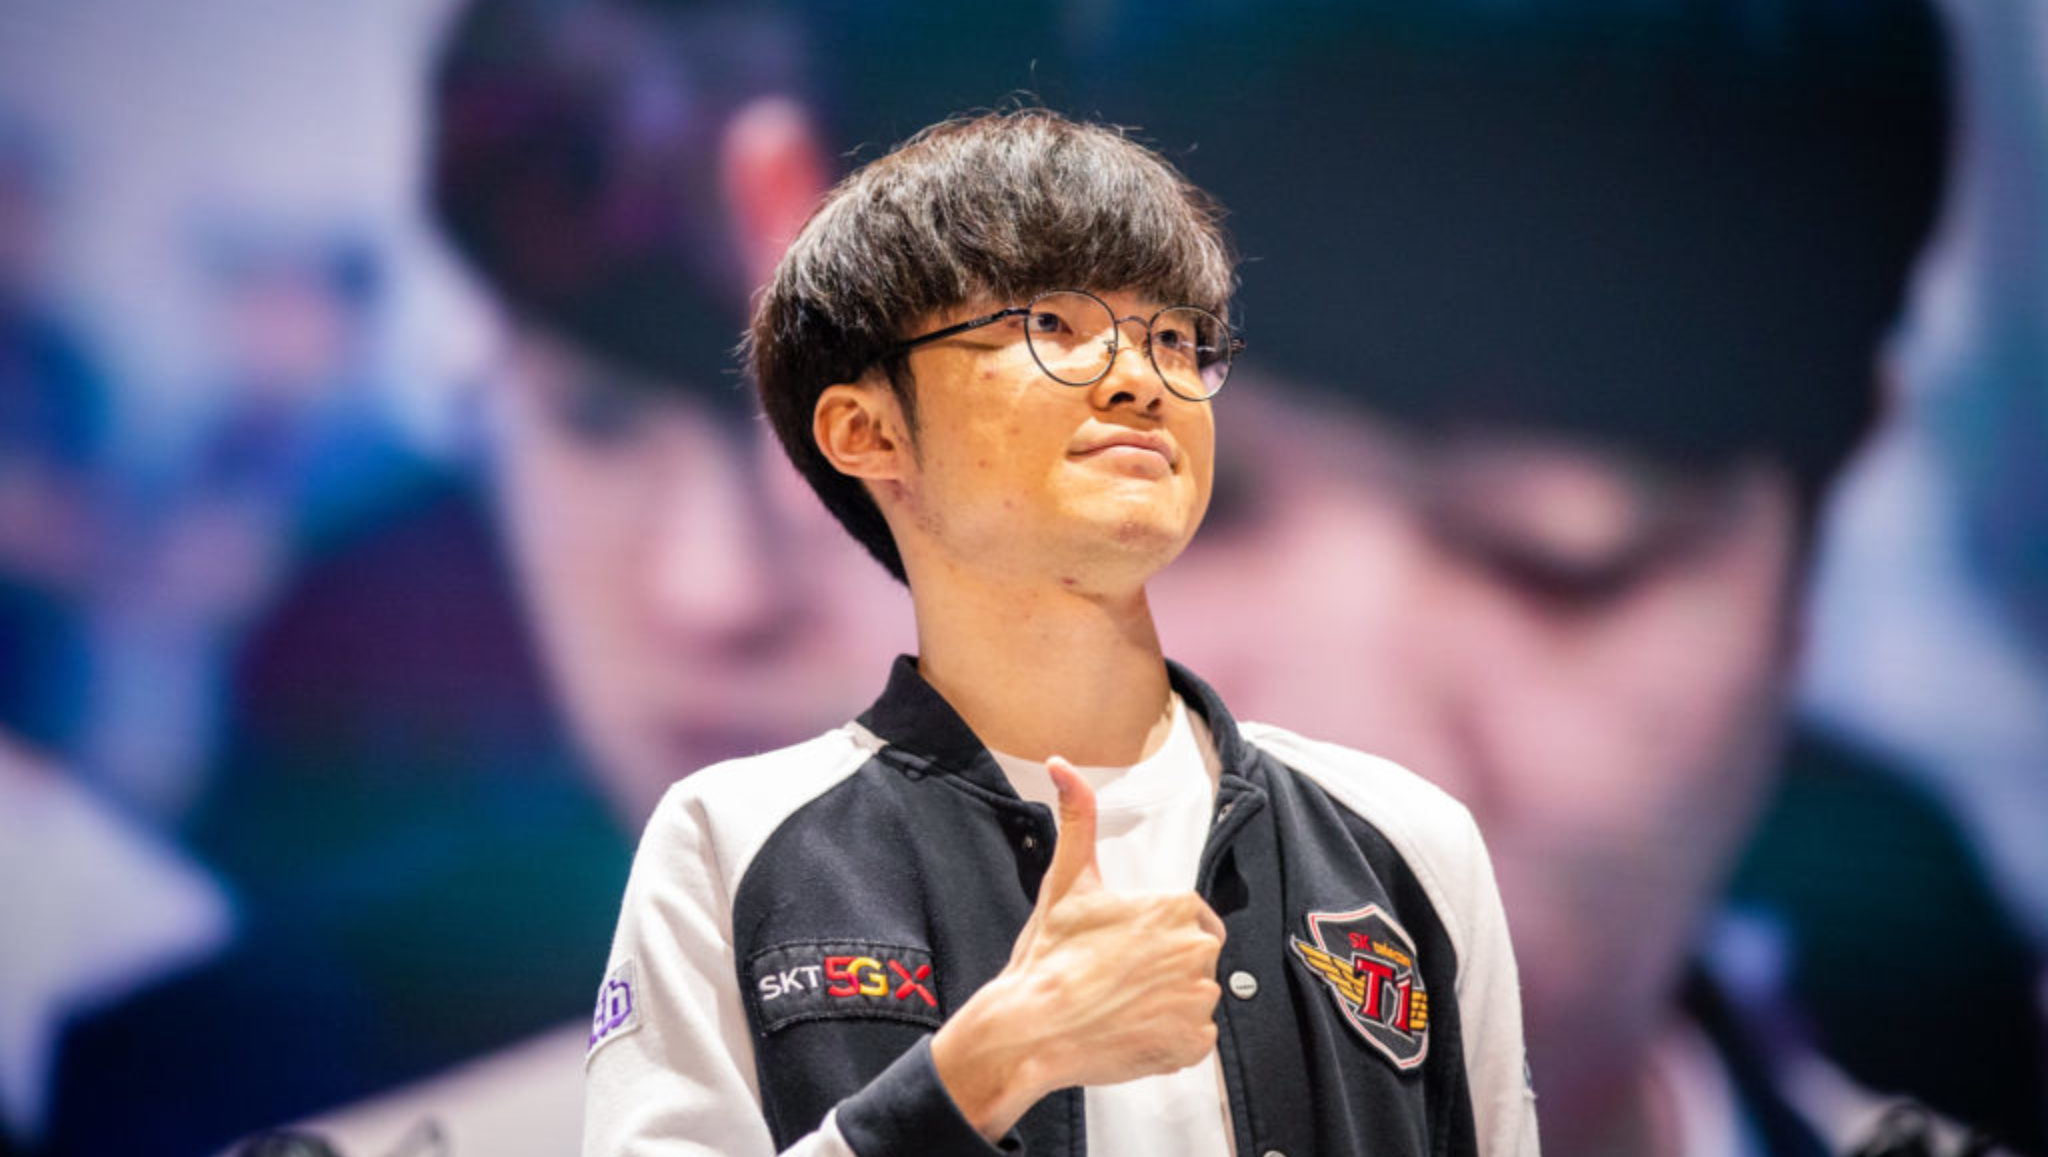 League Of Legends Player FAKER Hits 500 Wins In The LCK